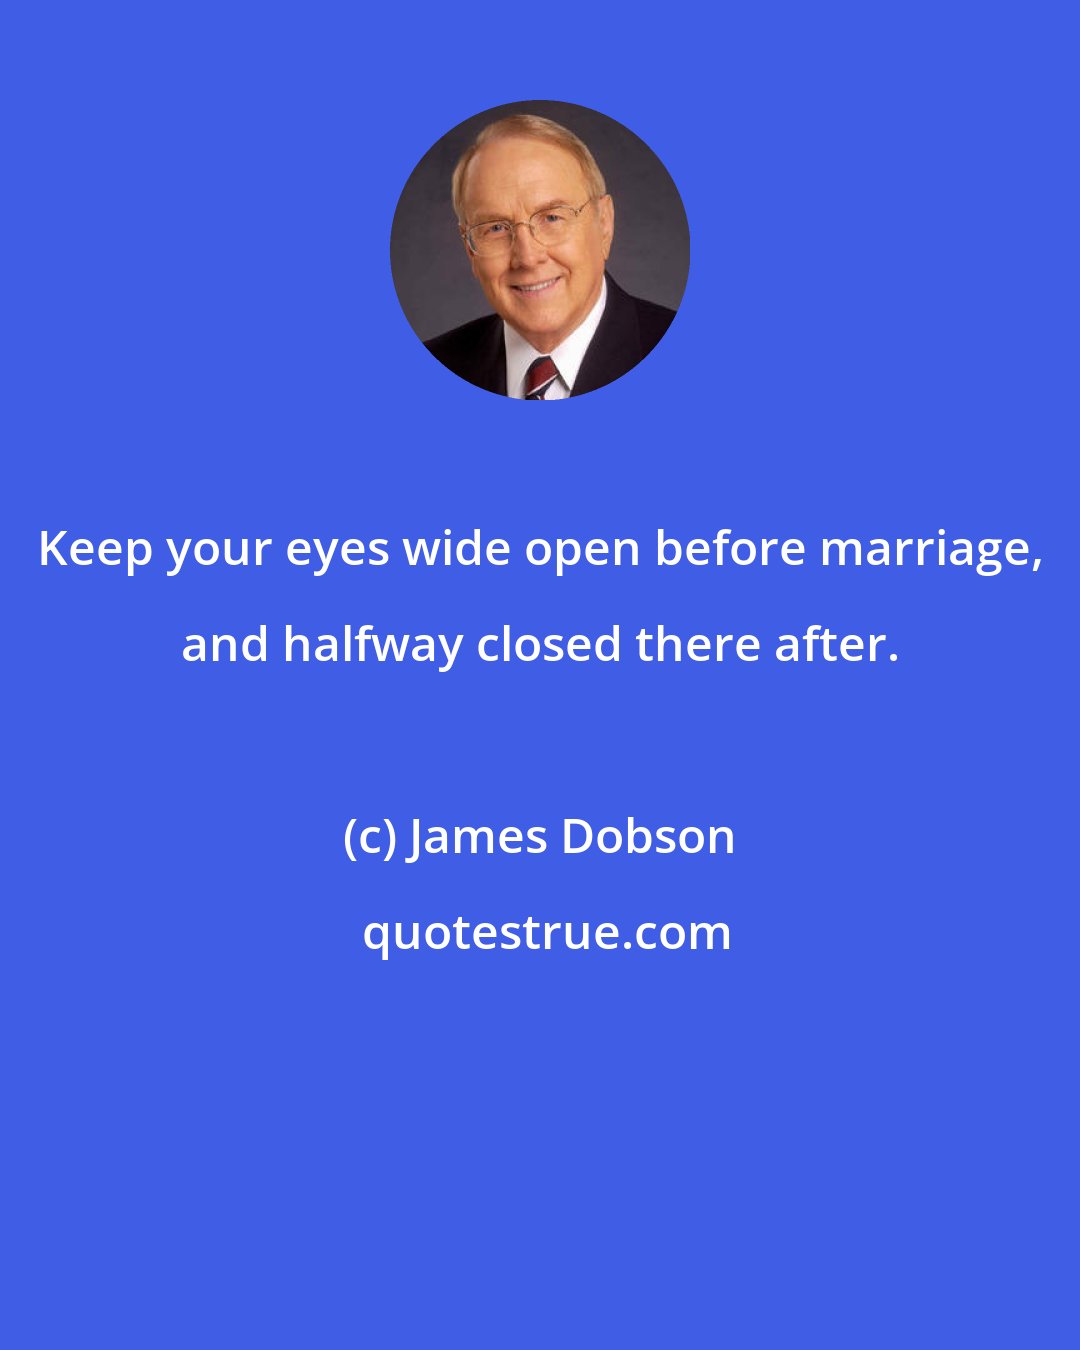 James Dobson: Keep your eyes wide open before marriage, and halfway closed there after.